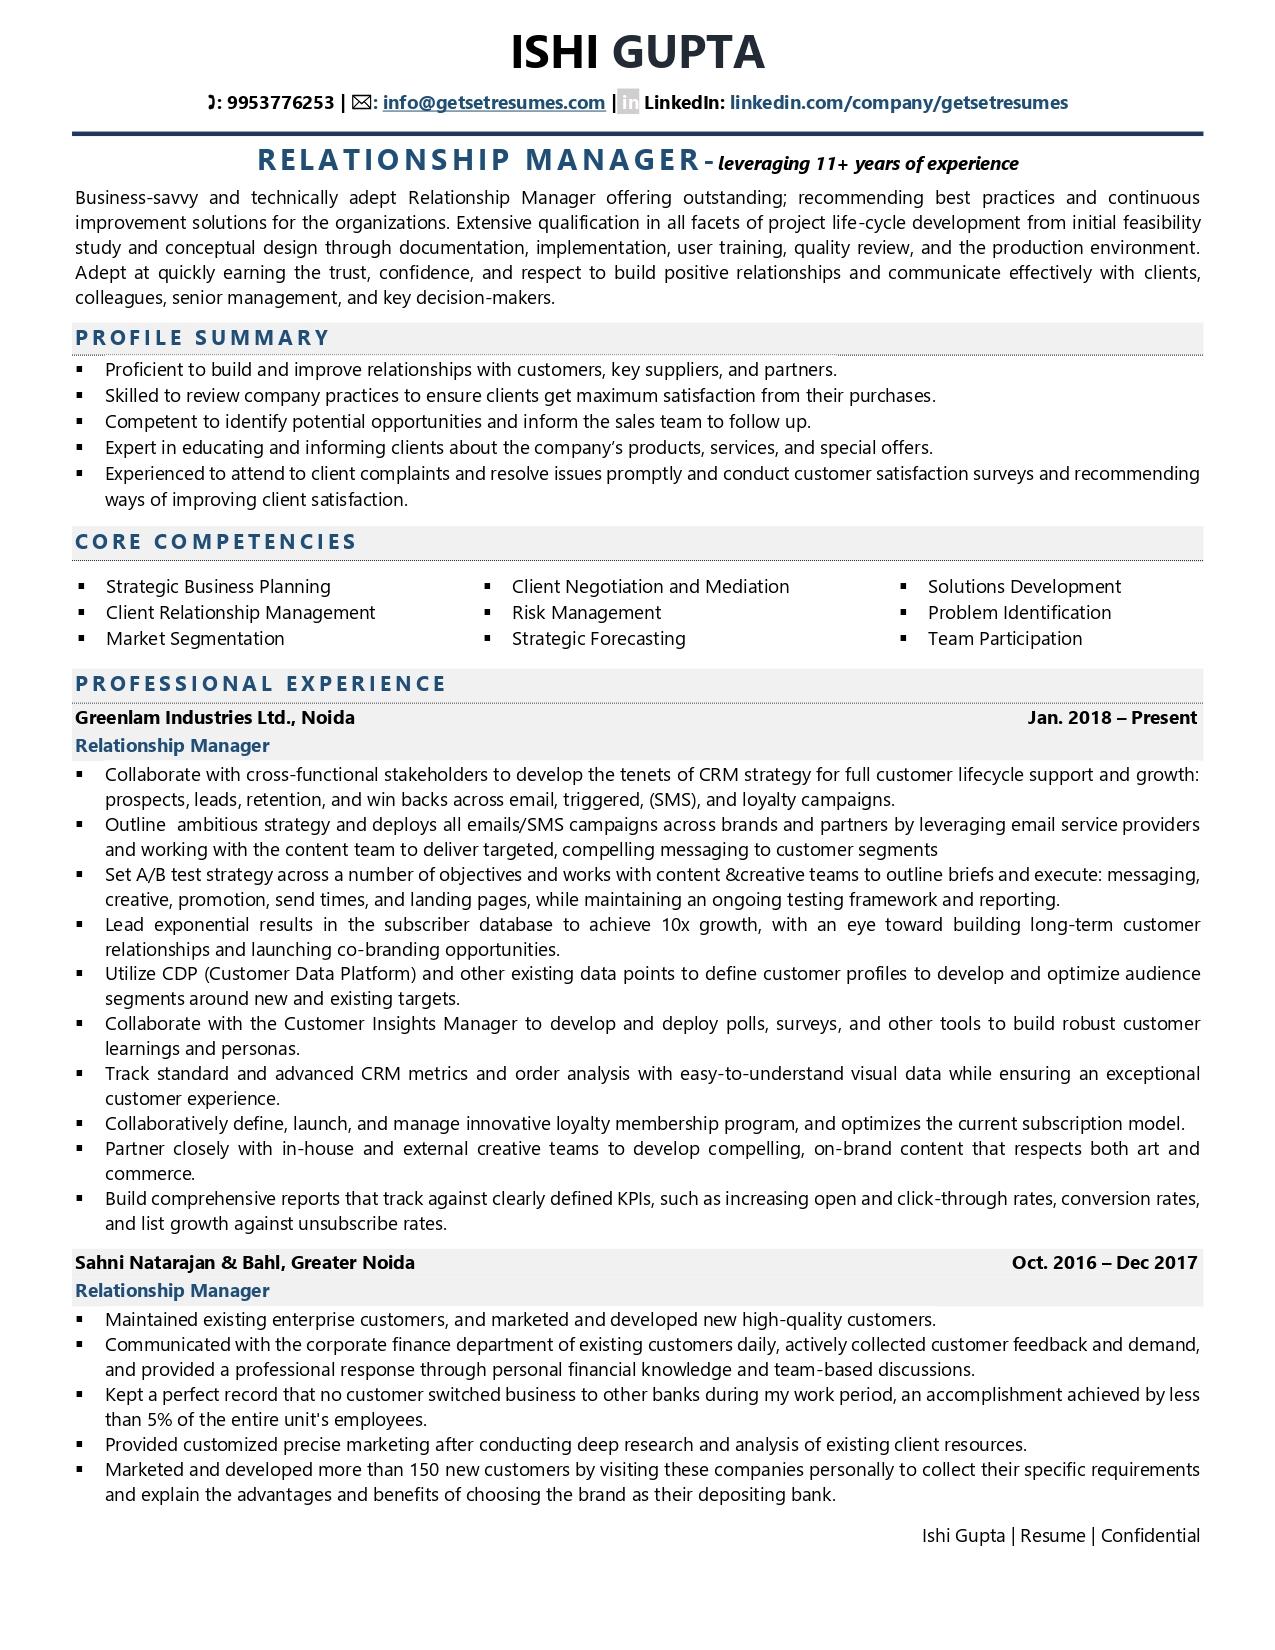 Relationship Manager - Resume Example & Template